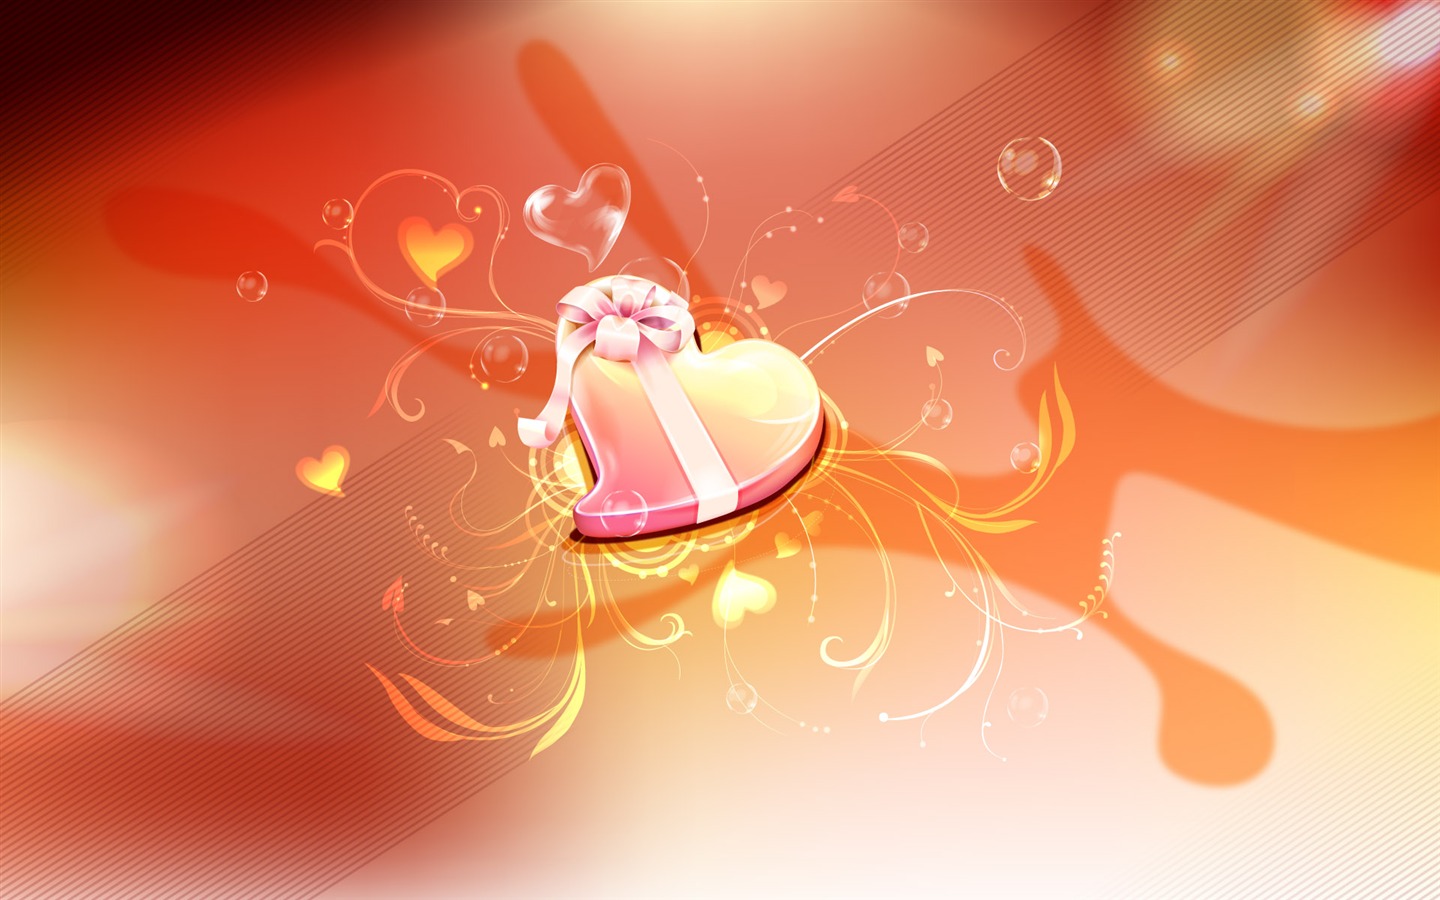 Valentine's Day Love Theme Wallpapers (2) #11 - 1440x900